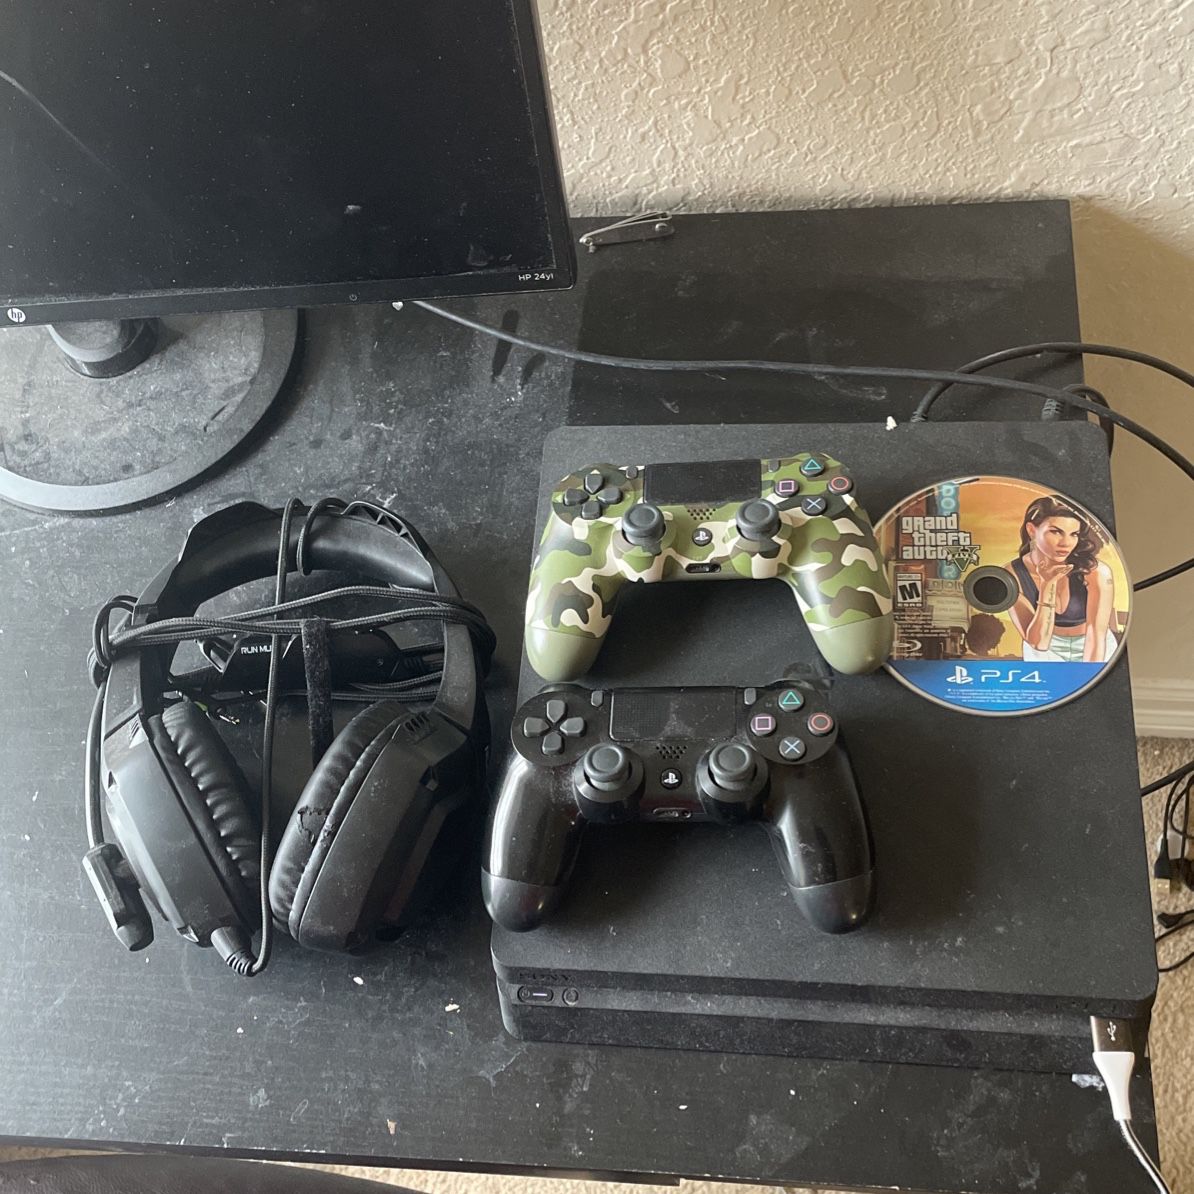 Ps4 w 2 Controllers, Headset, And Gta V, Monitor, Desk And Chair 